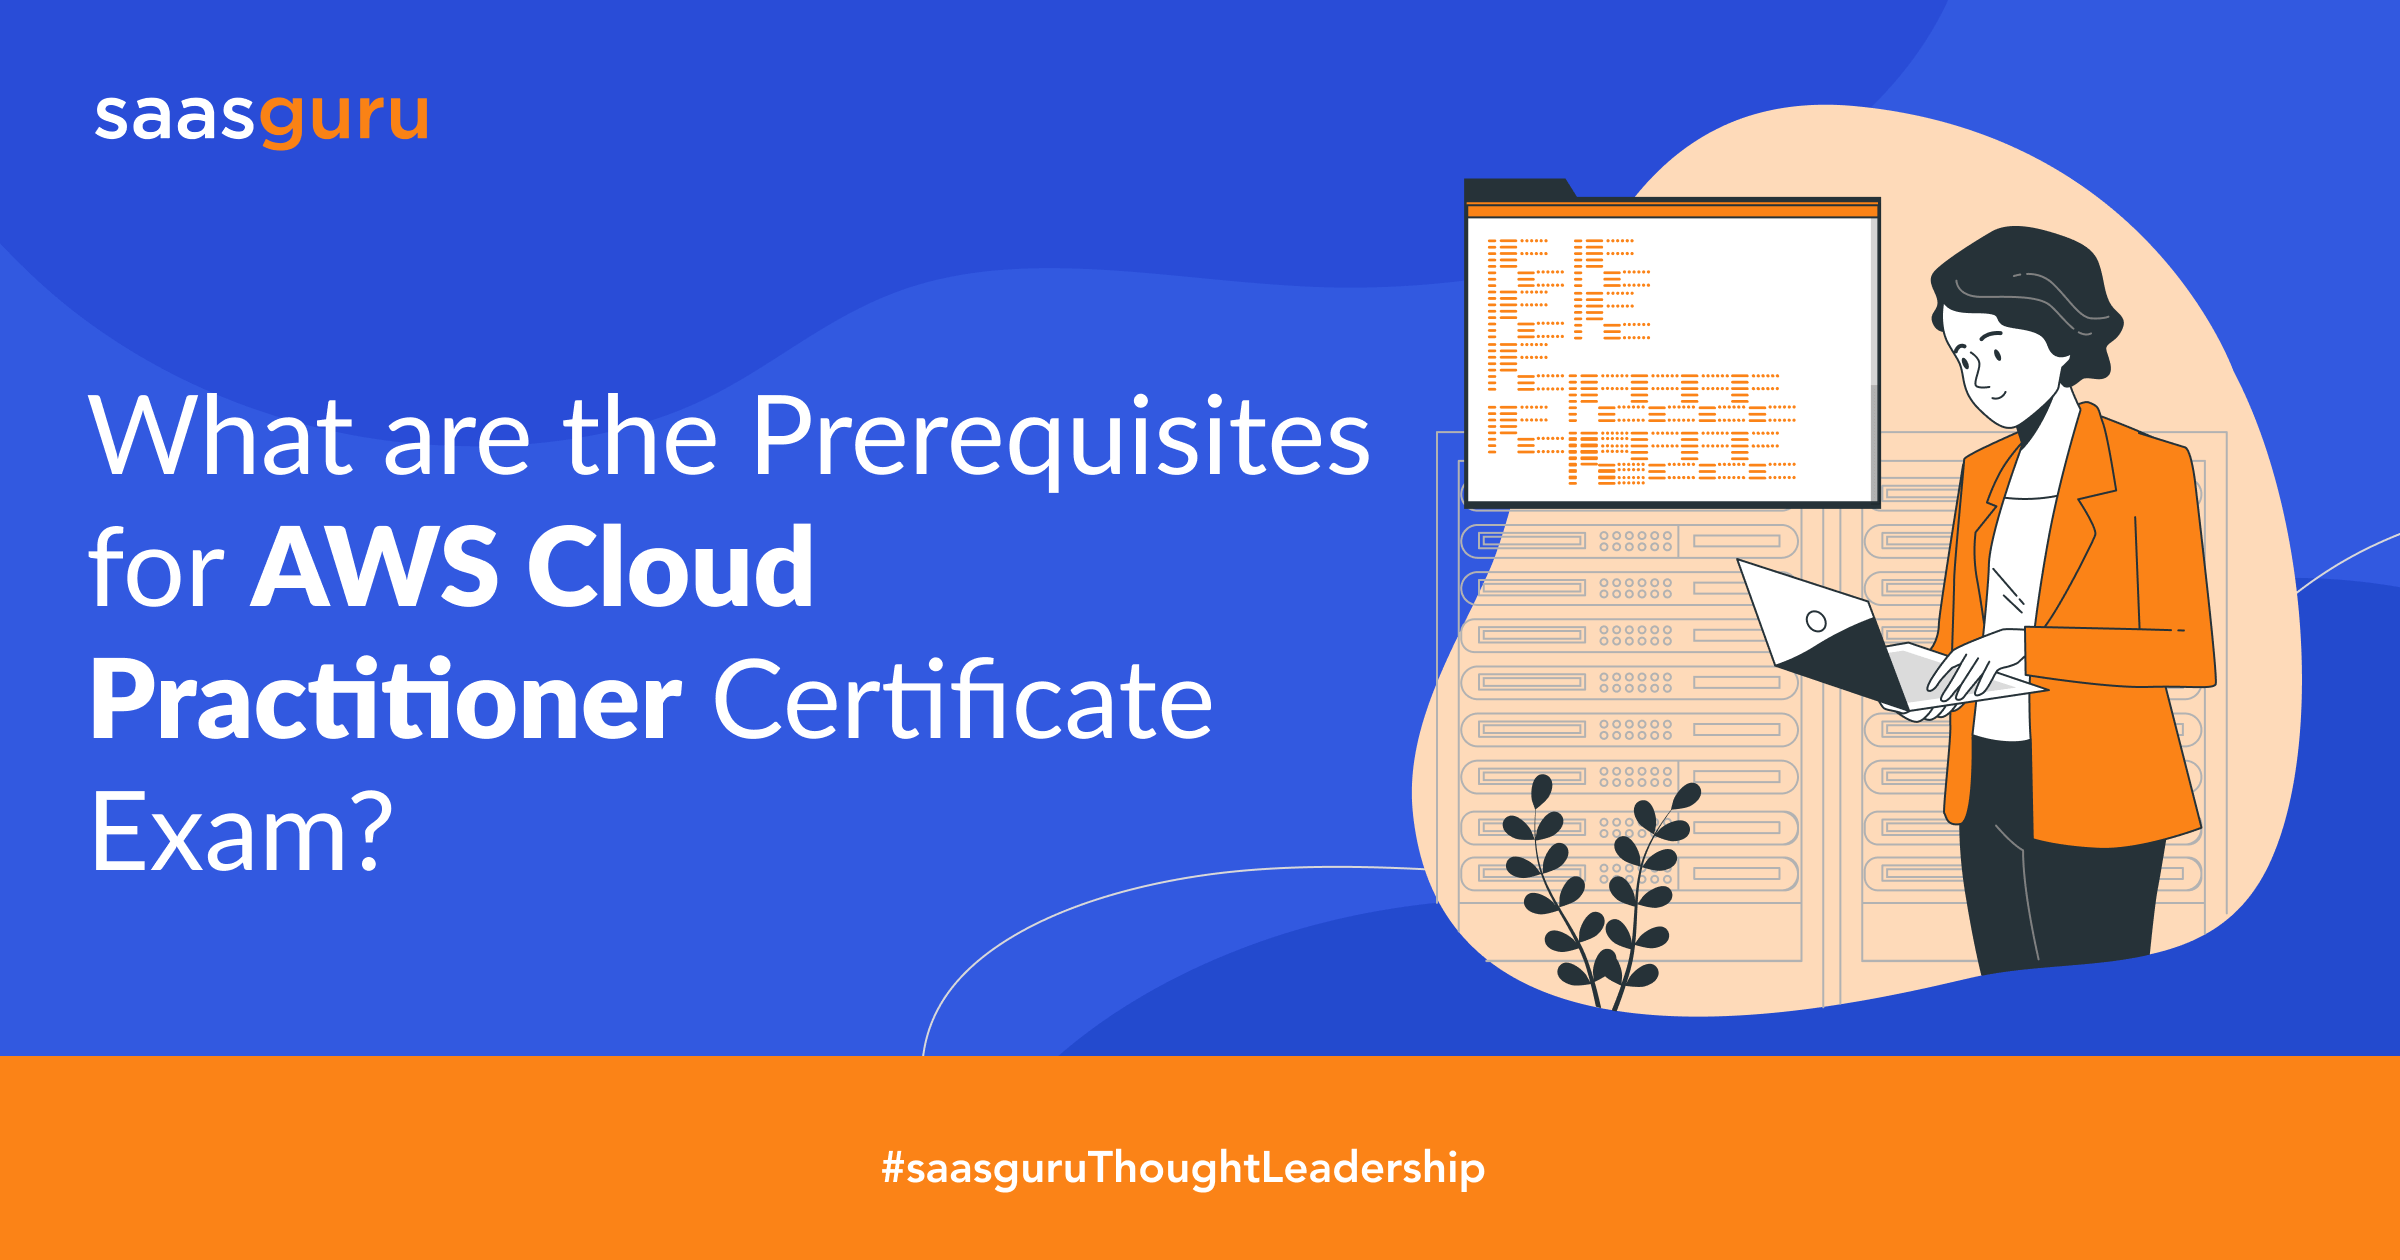 What are the Prerequisites for AWS Cloud Practitioner Certificate Exam?